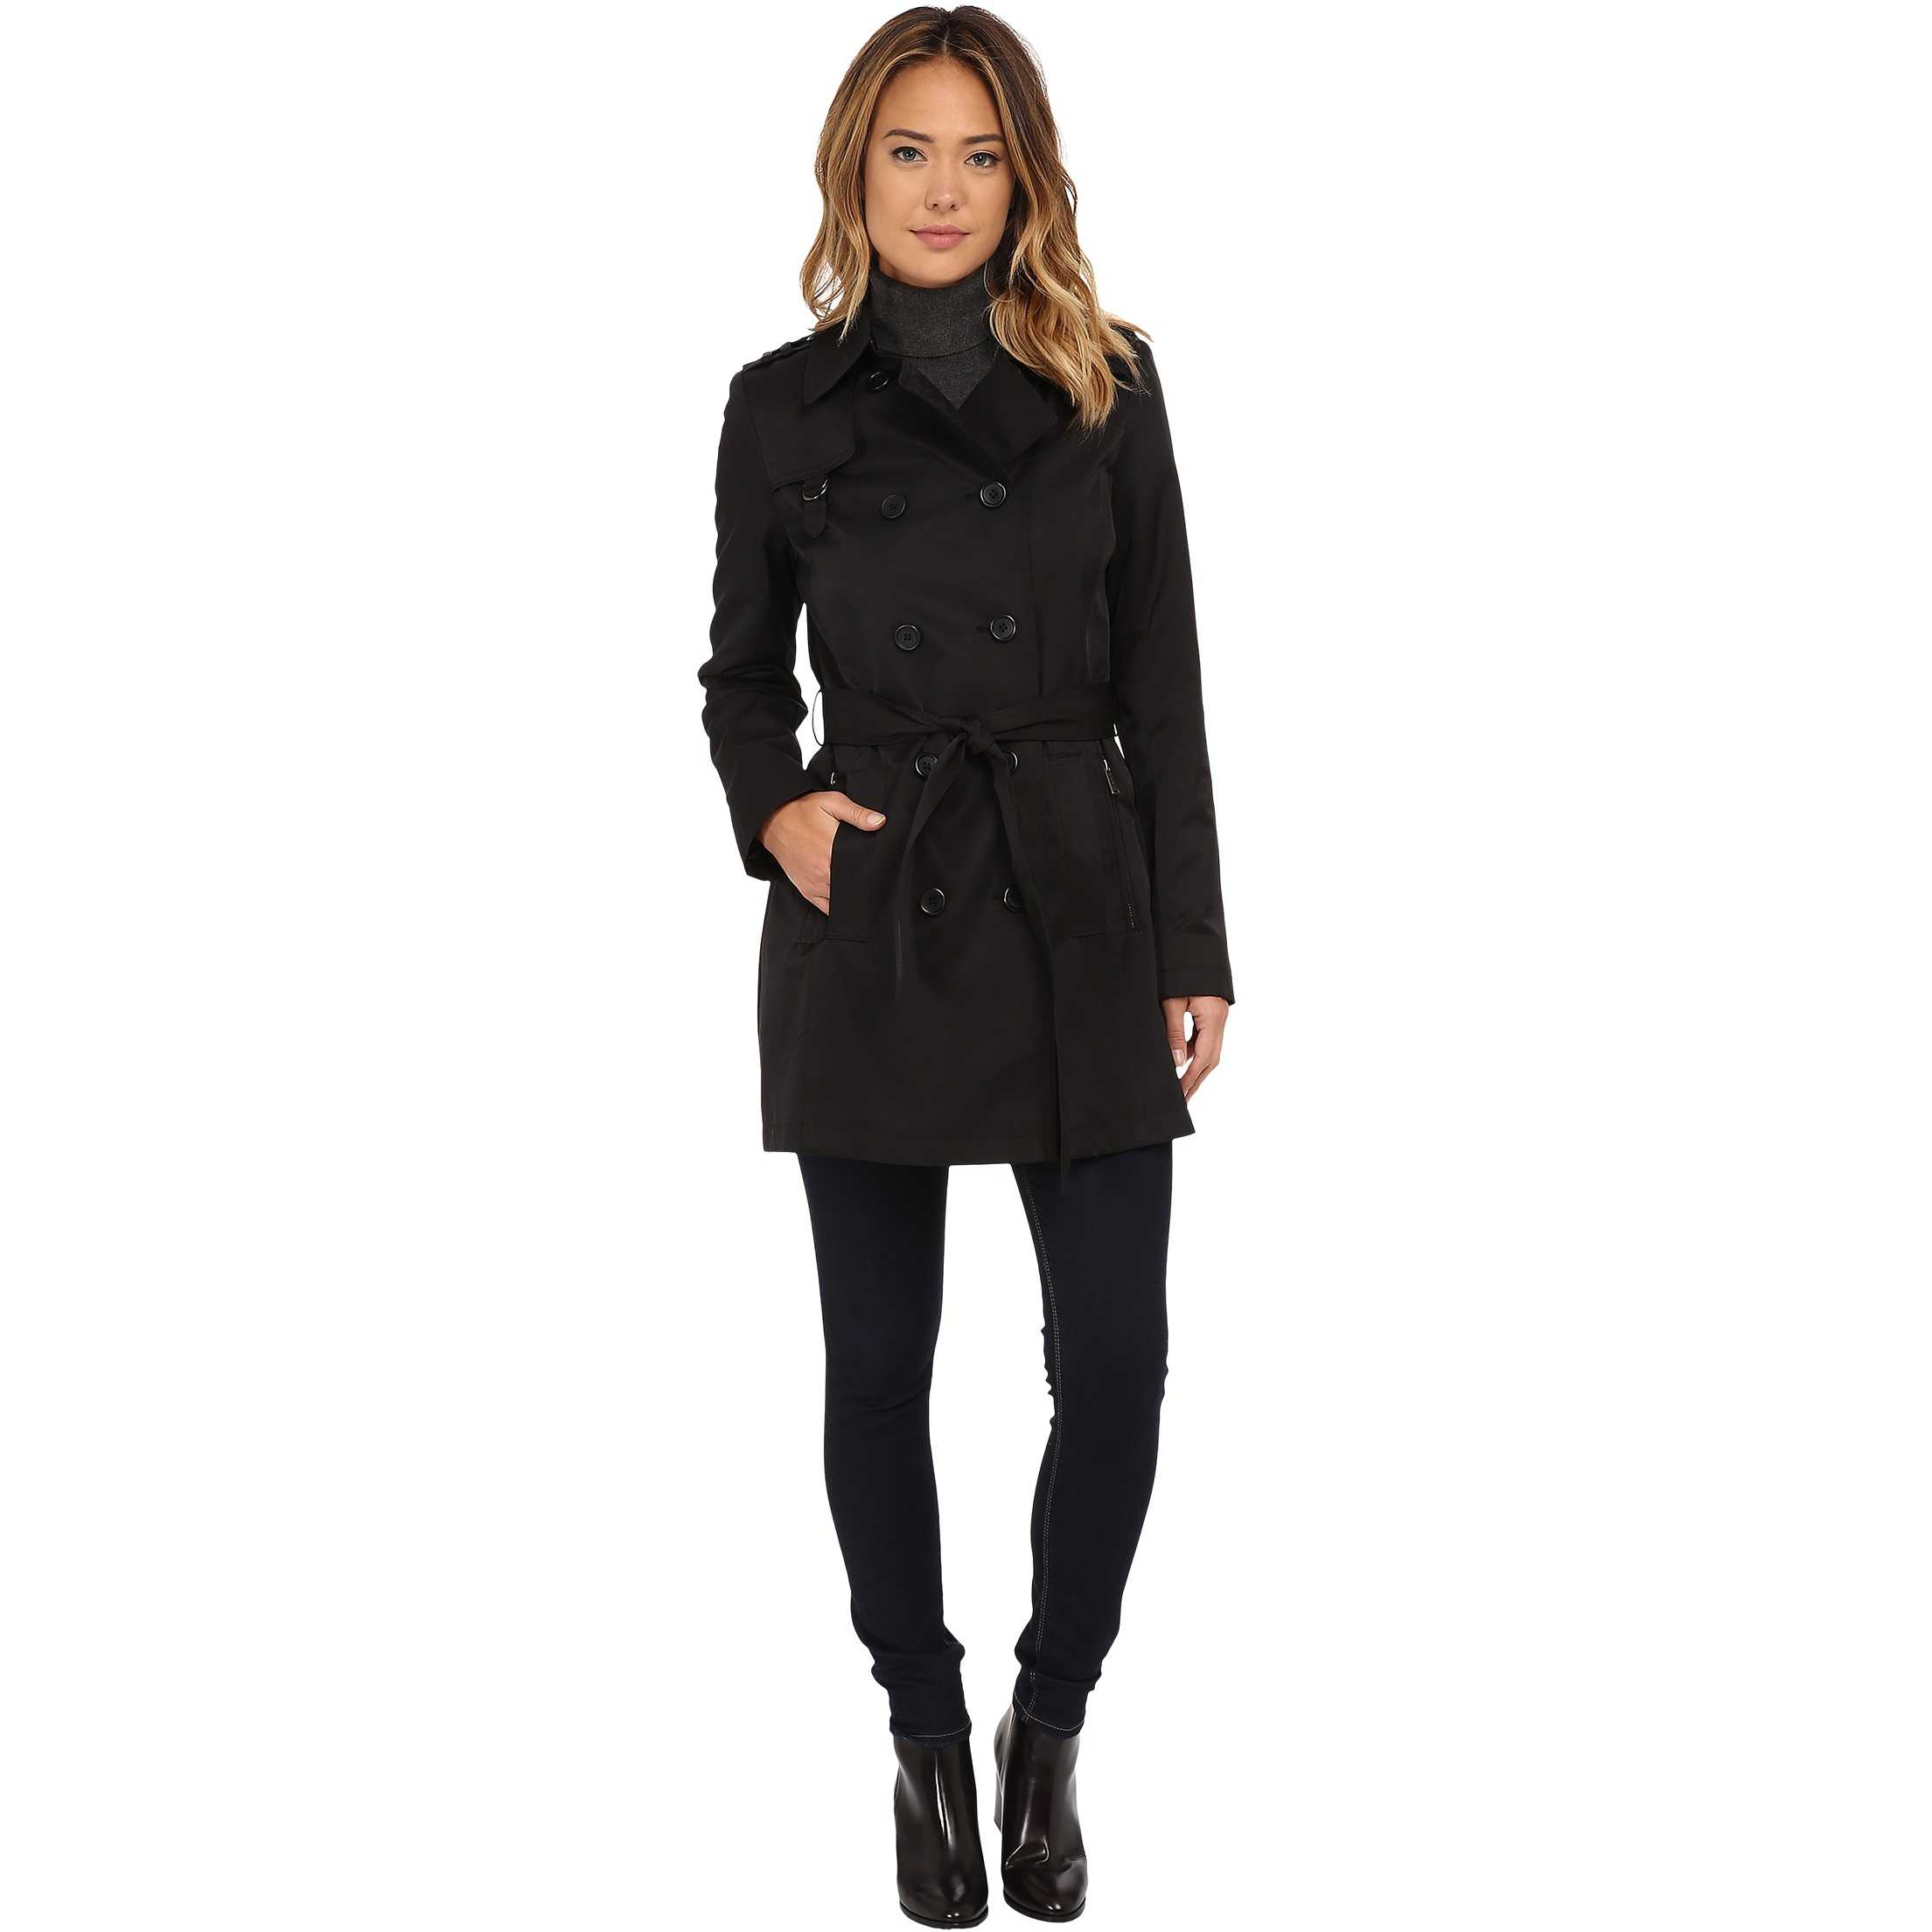 DKNY Double Breasted Belted Trench w/ Zipper and Tab Details 06541-Y5 Black trench dama